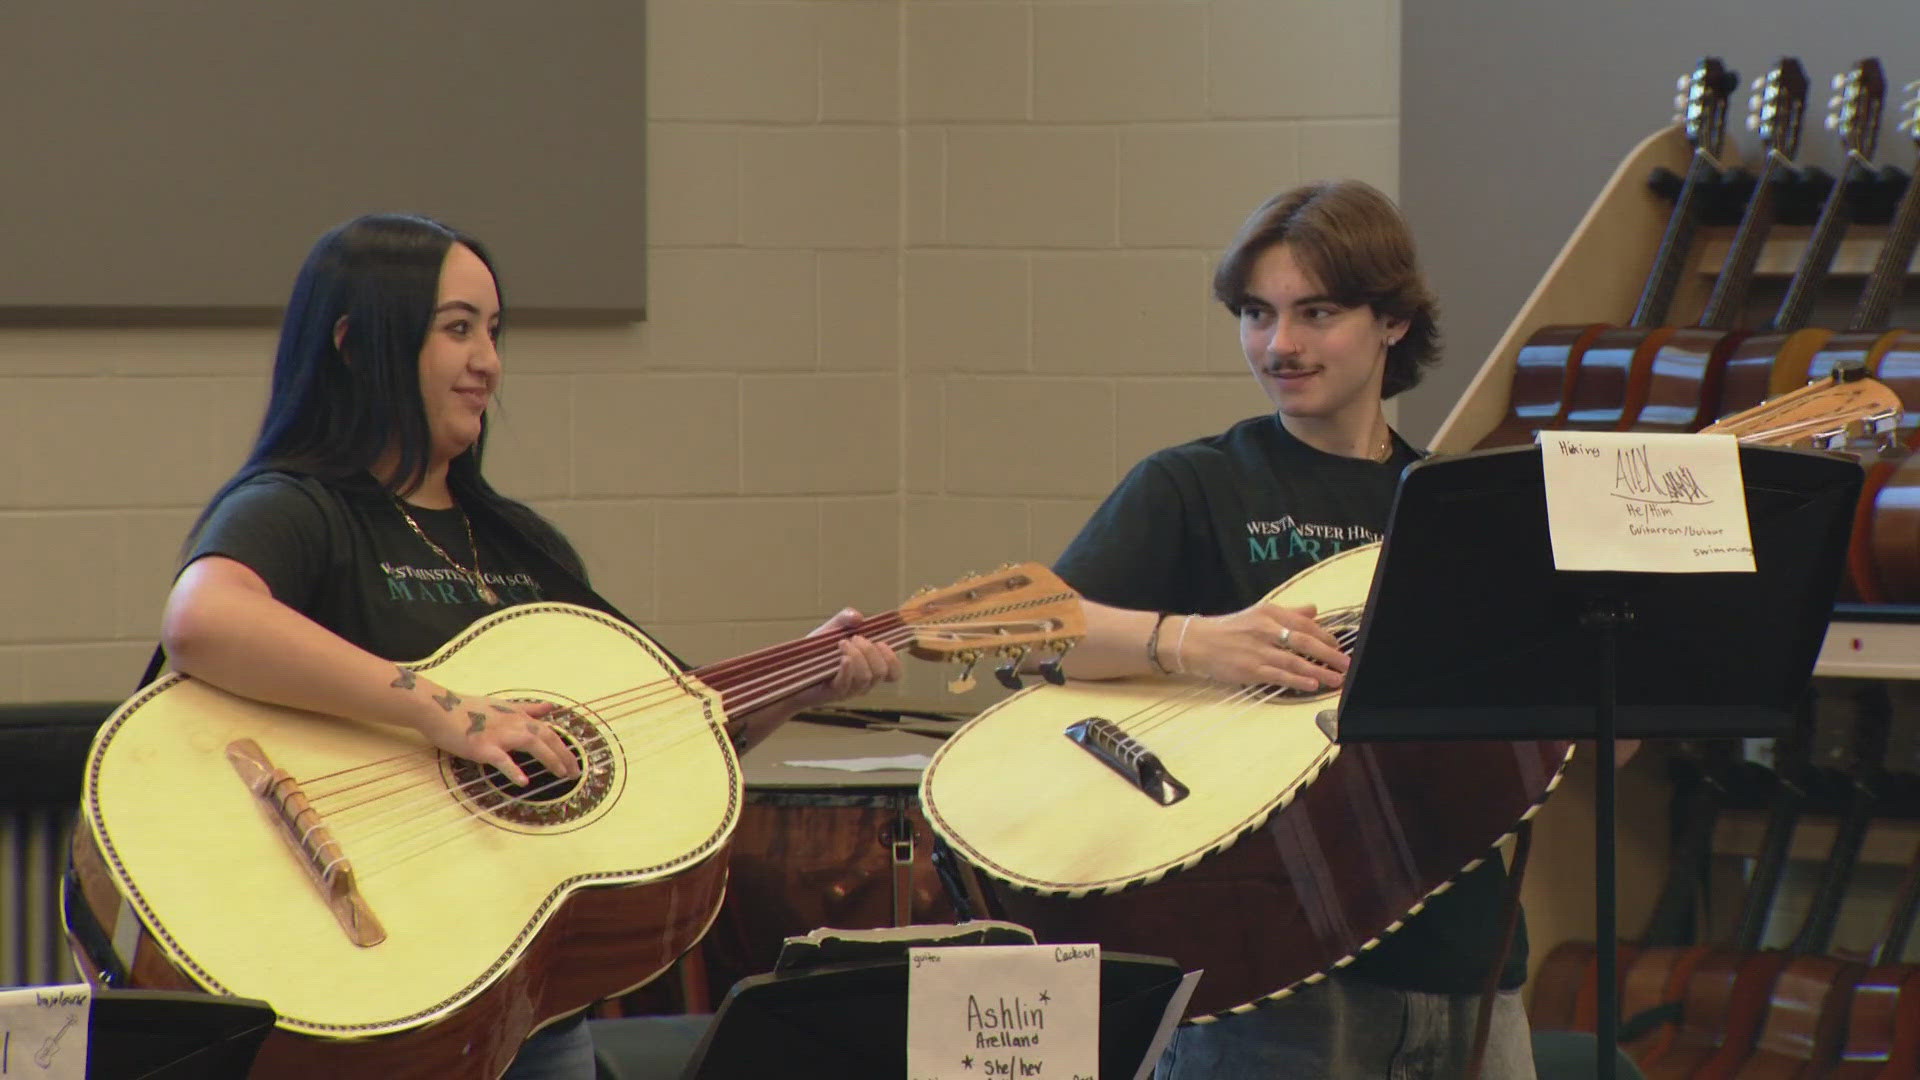 Michael Linert, head of the music department at Westminster High School, hopes more schools will adopt mariachi bands into their classrooms.